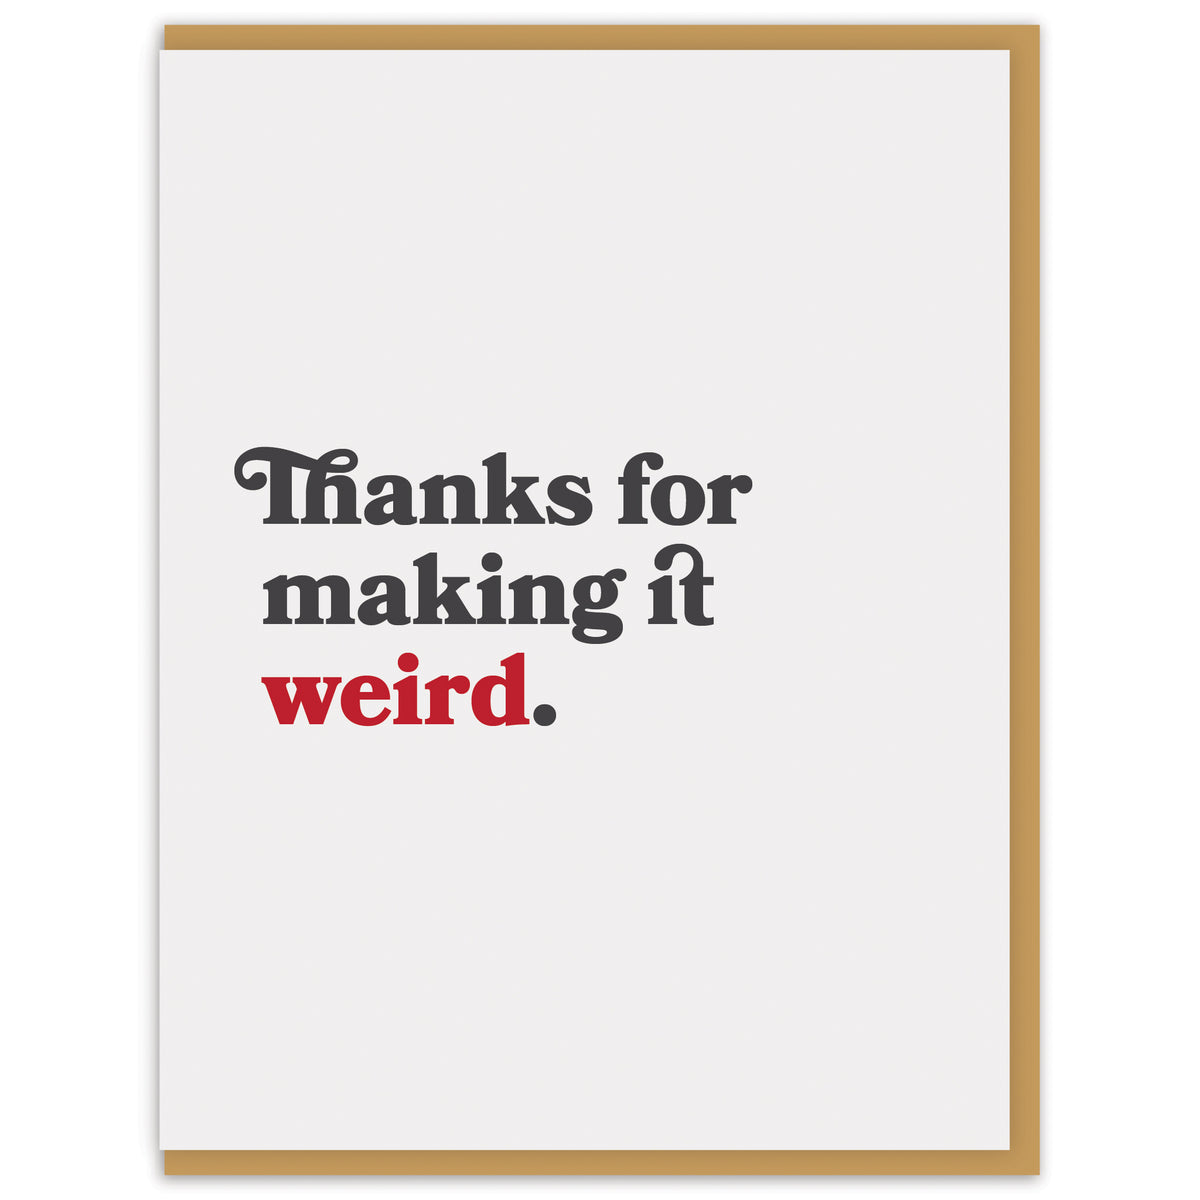 Thanks for making it weird.